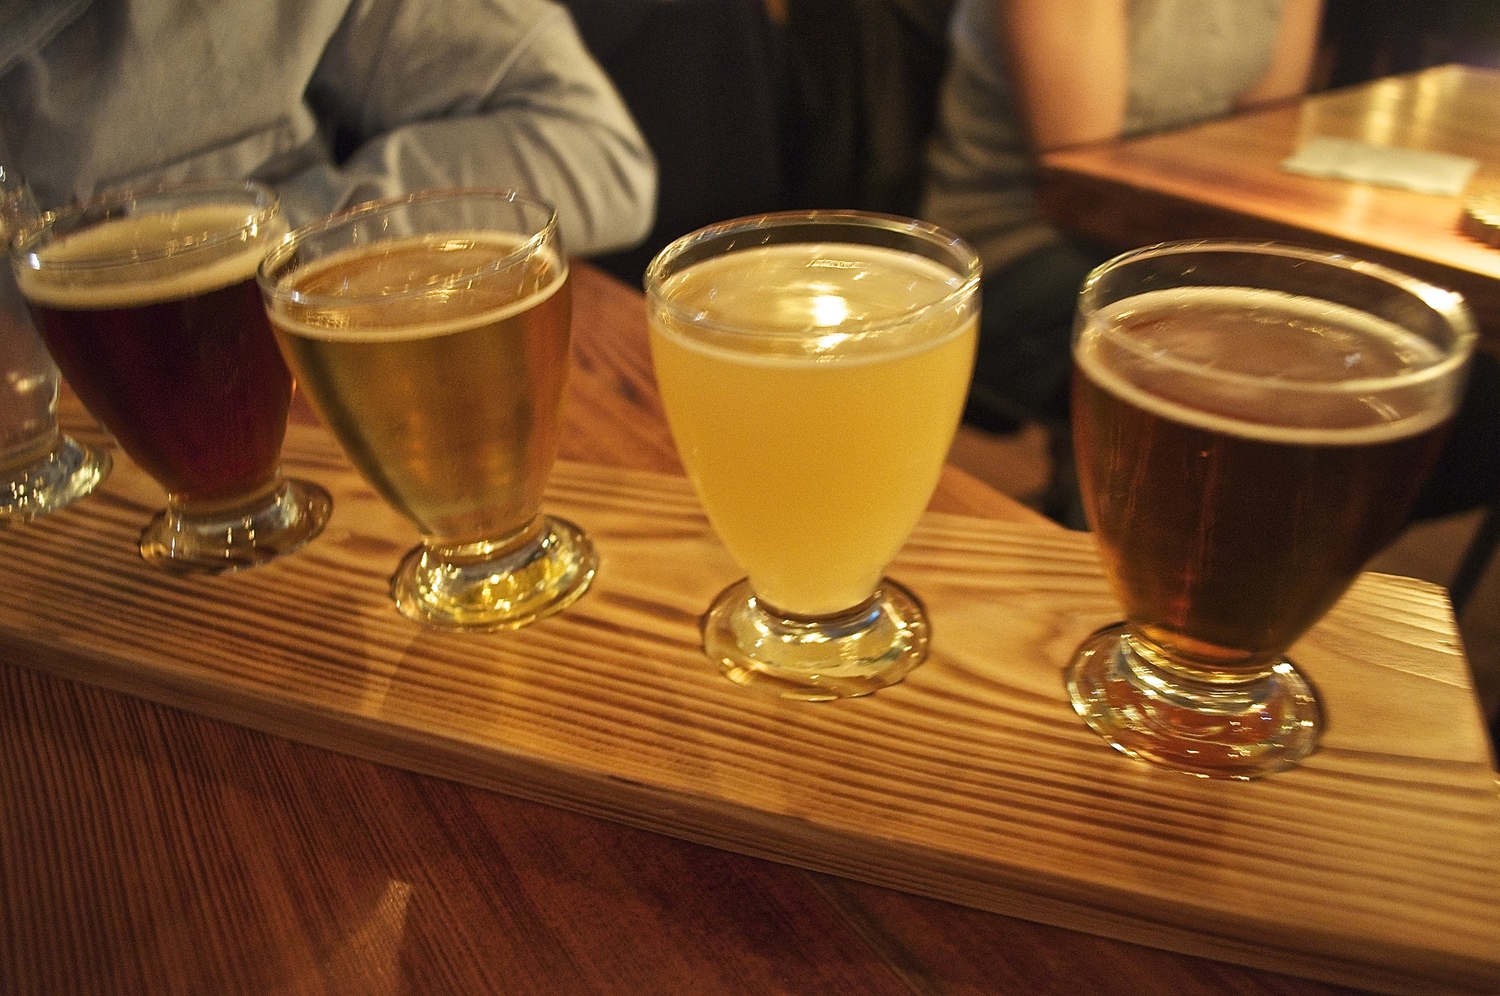 Beer pairings to go with not dogs